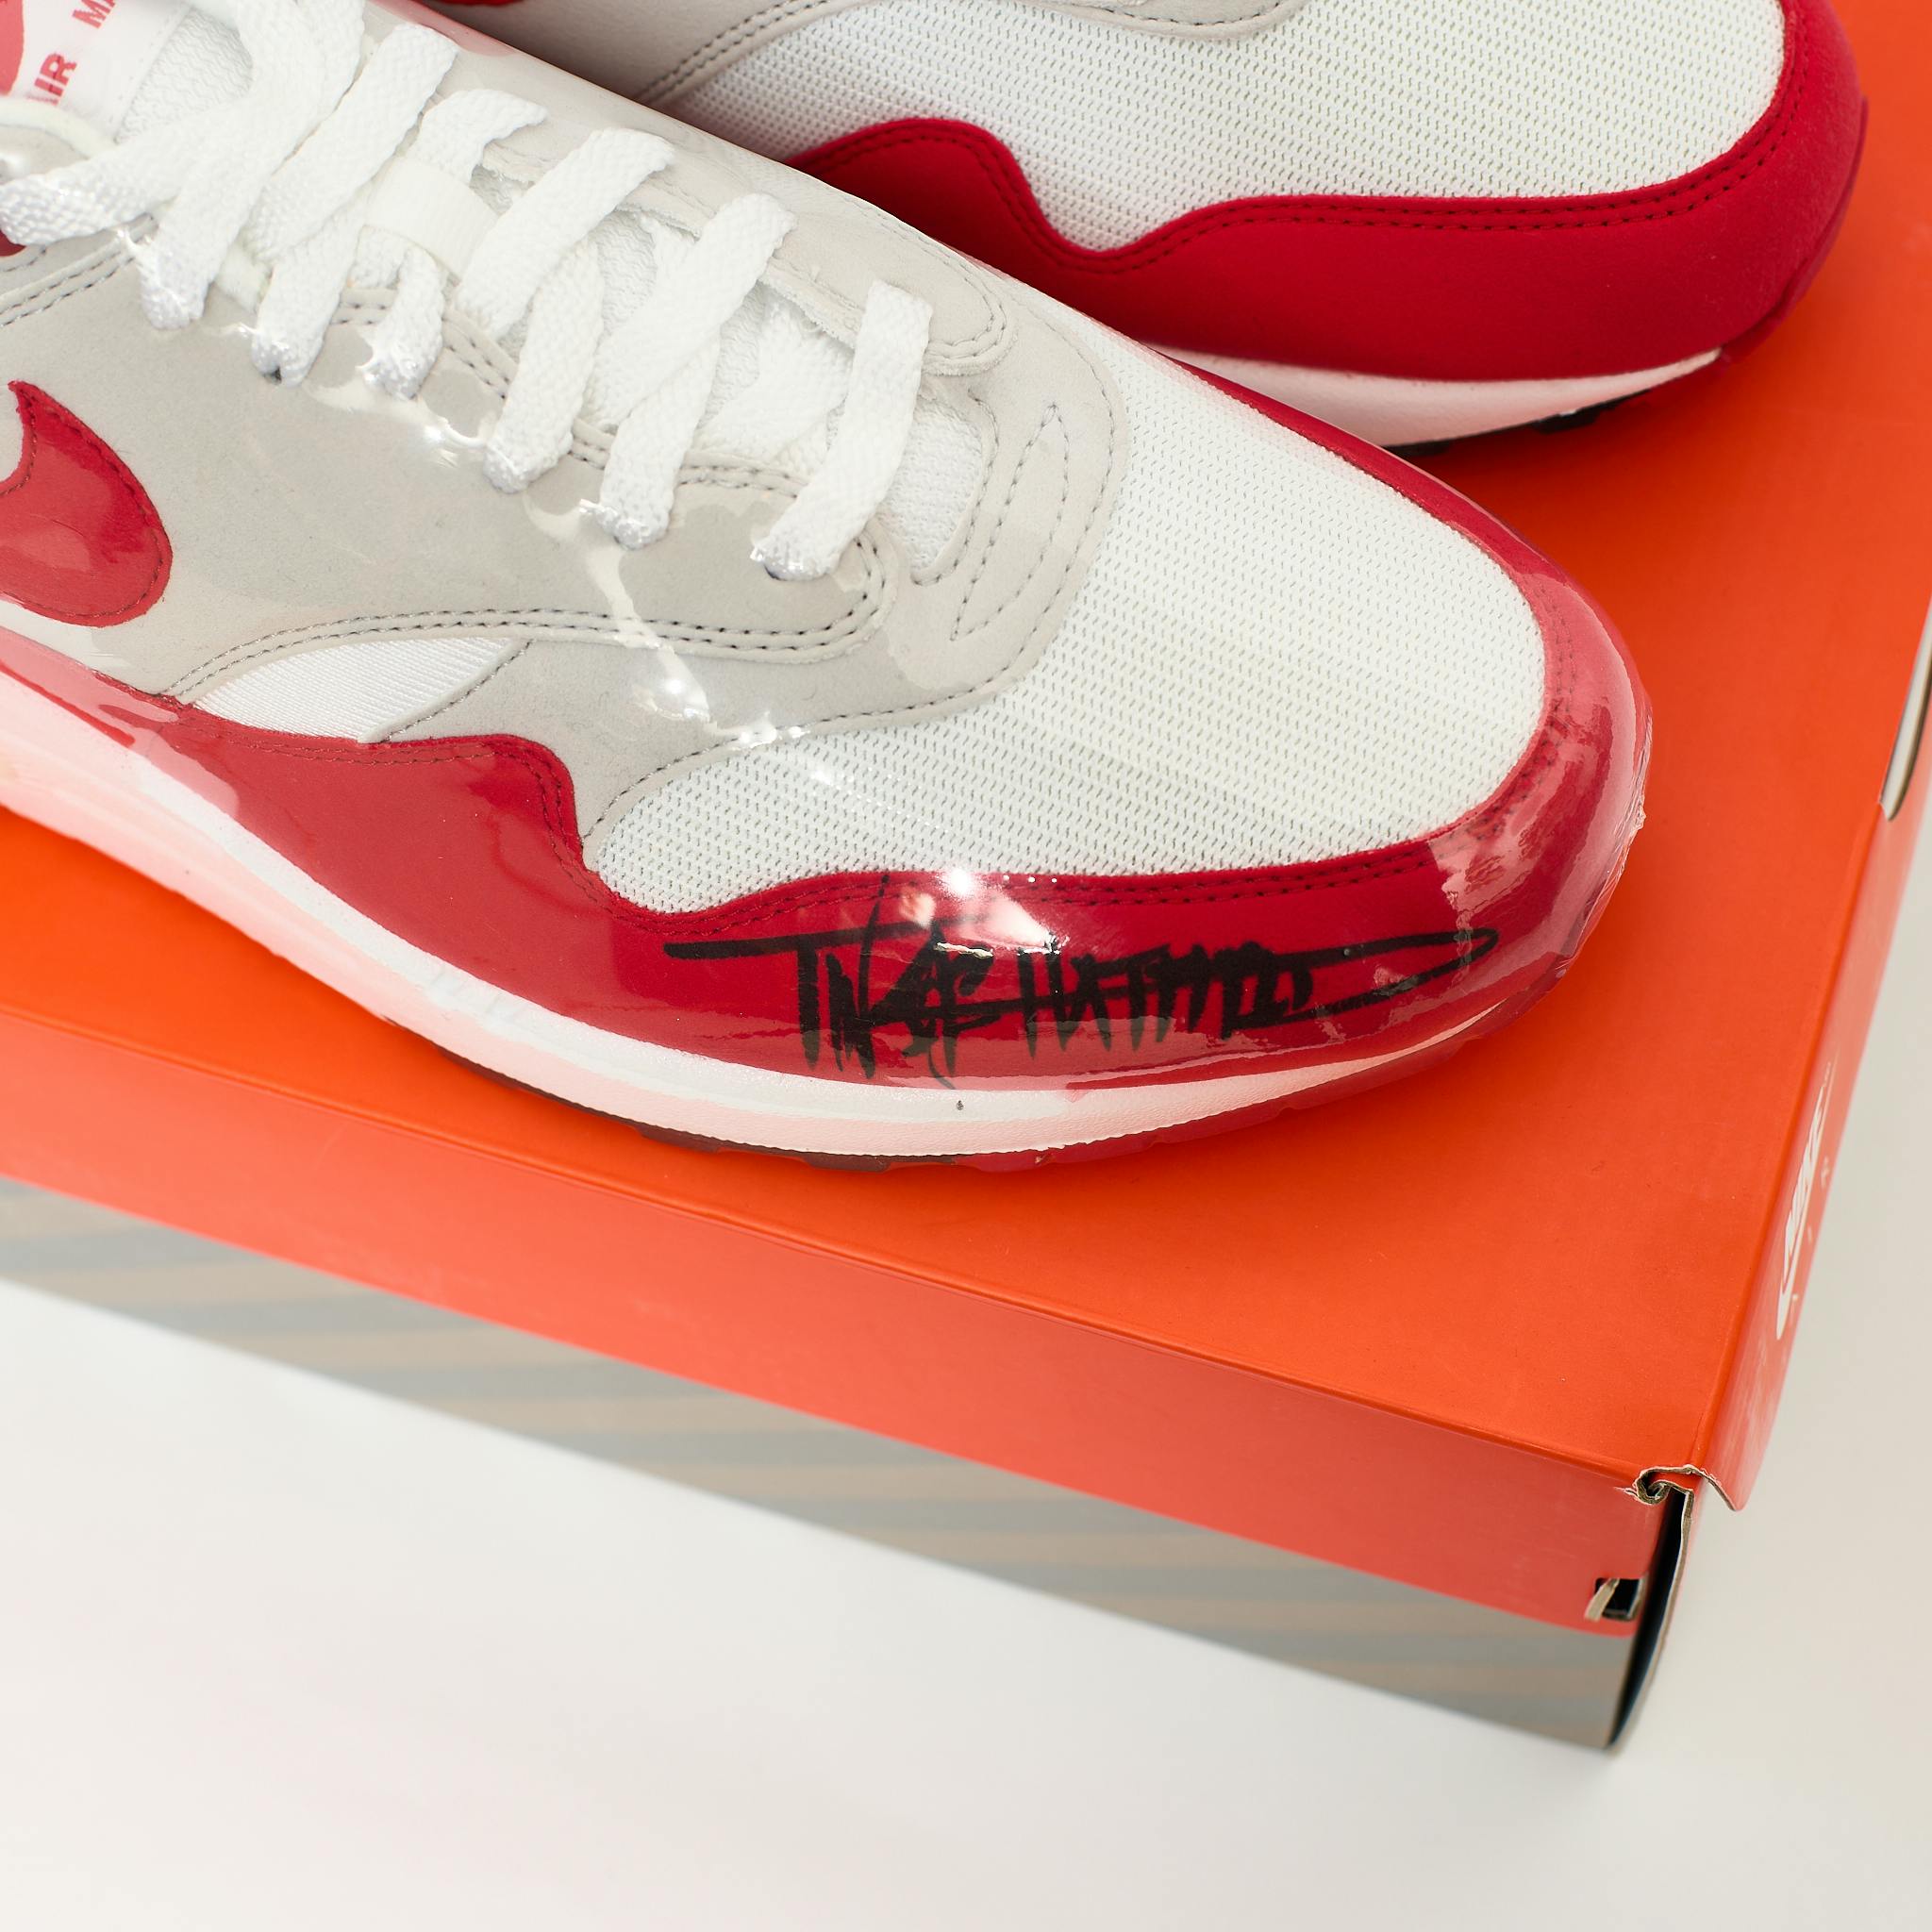 Nike Air Max 1 Anniversary Red Autographed Tinker Hatfield - 3